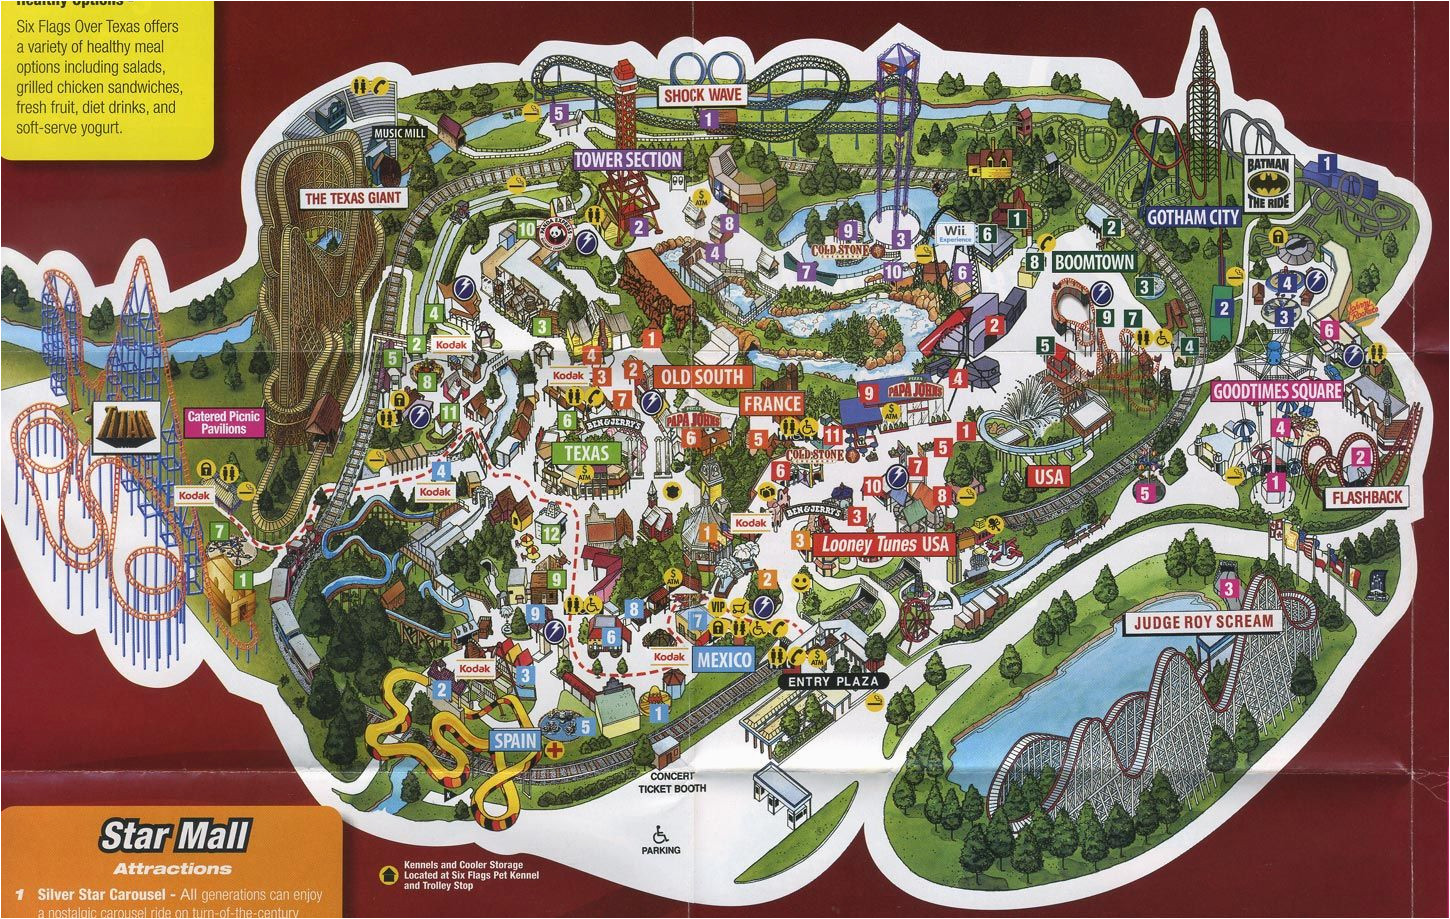 image result for six flags texas map park map designs texas